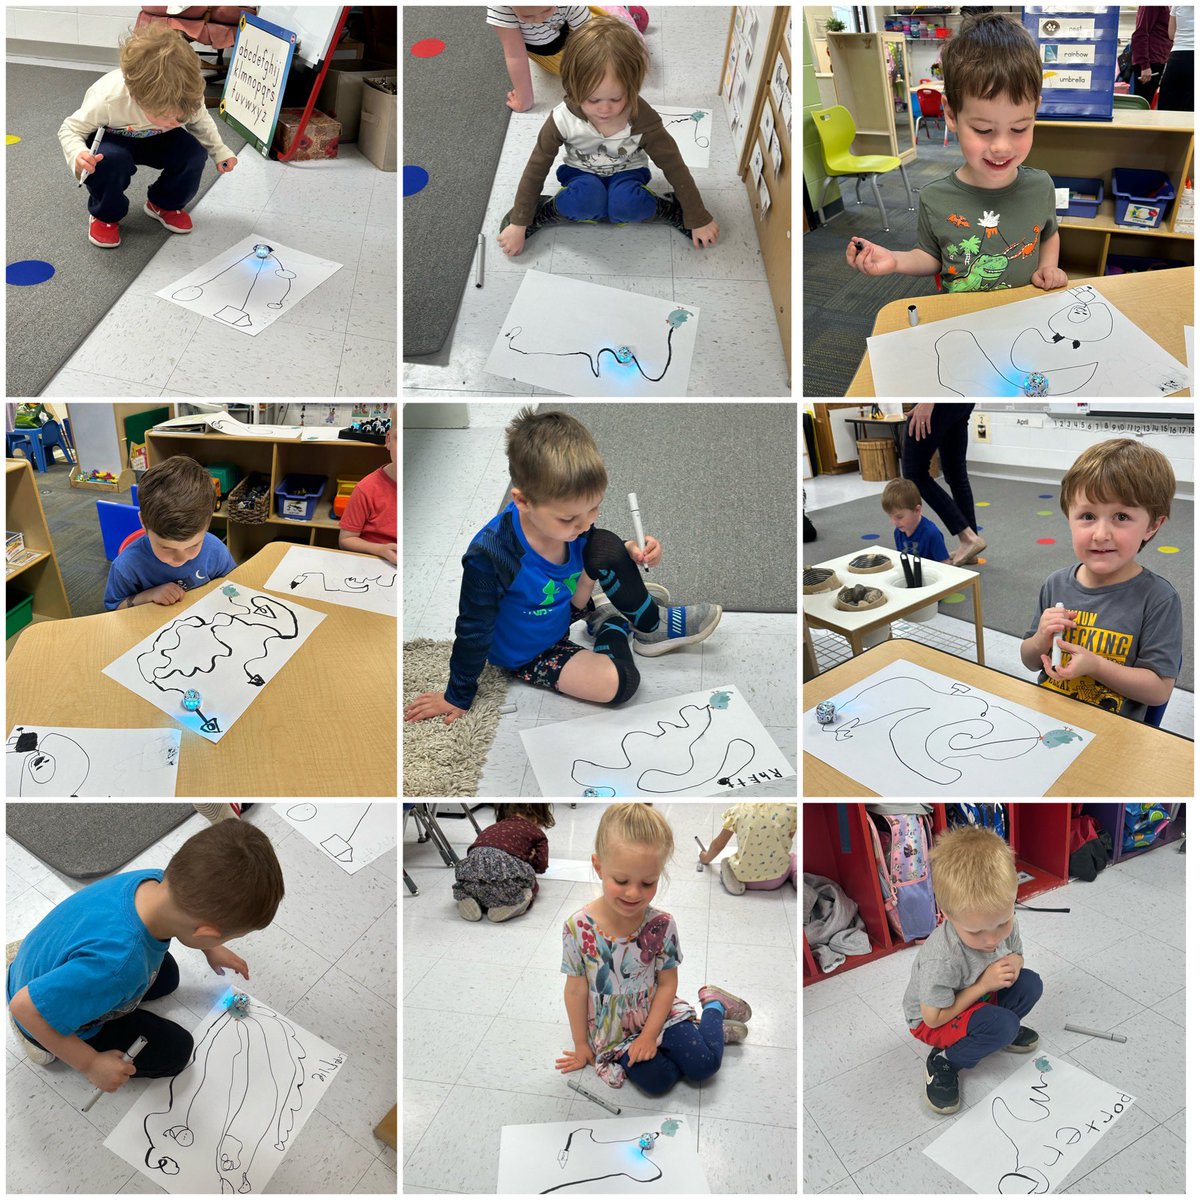 Our @vanmeterschools preschoolers loved coding their @ozobot robots with a path they drew today. It’s always so fun watching what they create and how excited they get when their Ozobot follows it.🤖

#coding #vanmeter #futurereadylibs